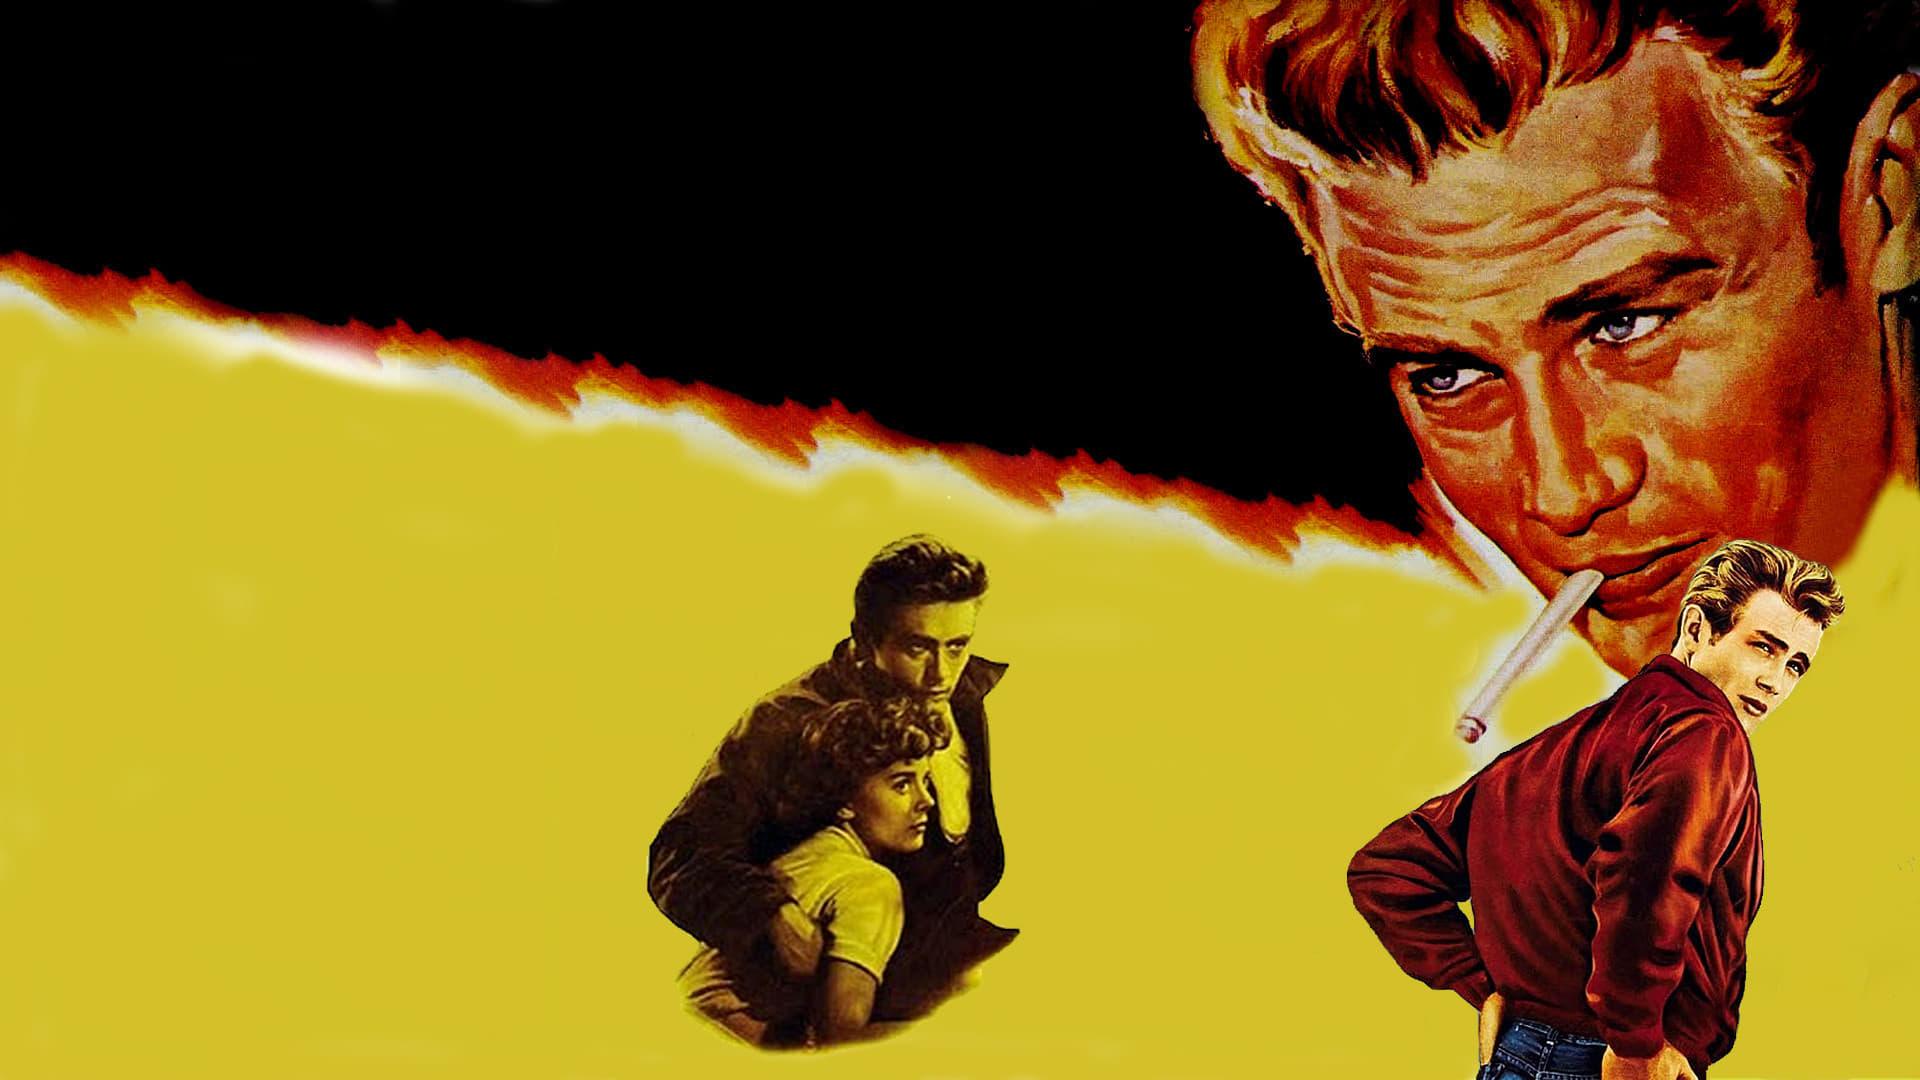 Rebel Without a Cause backdrop